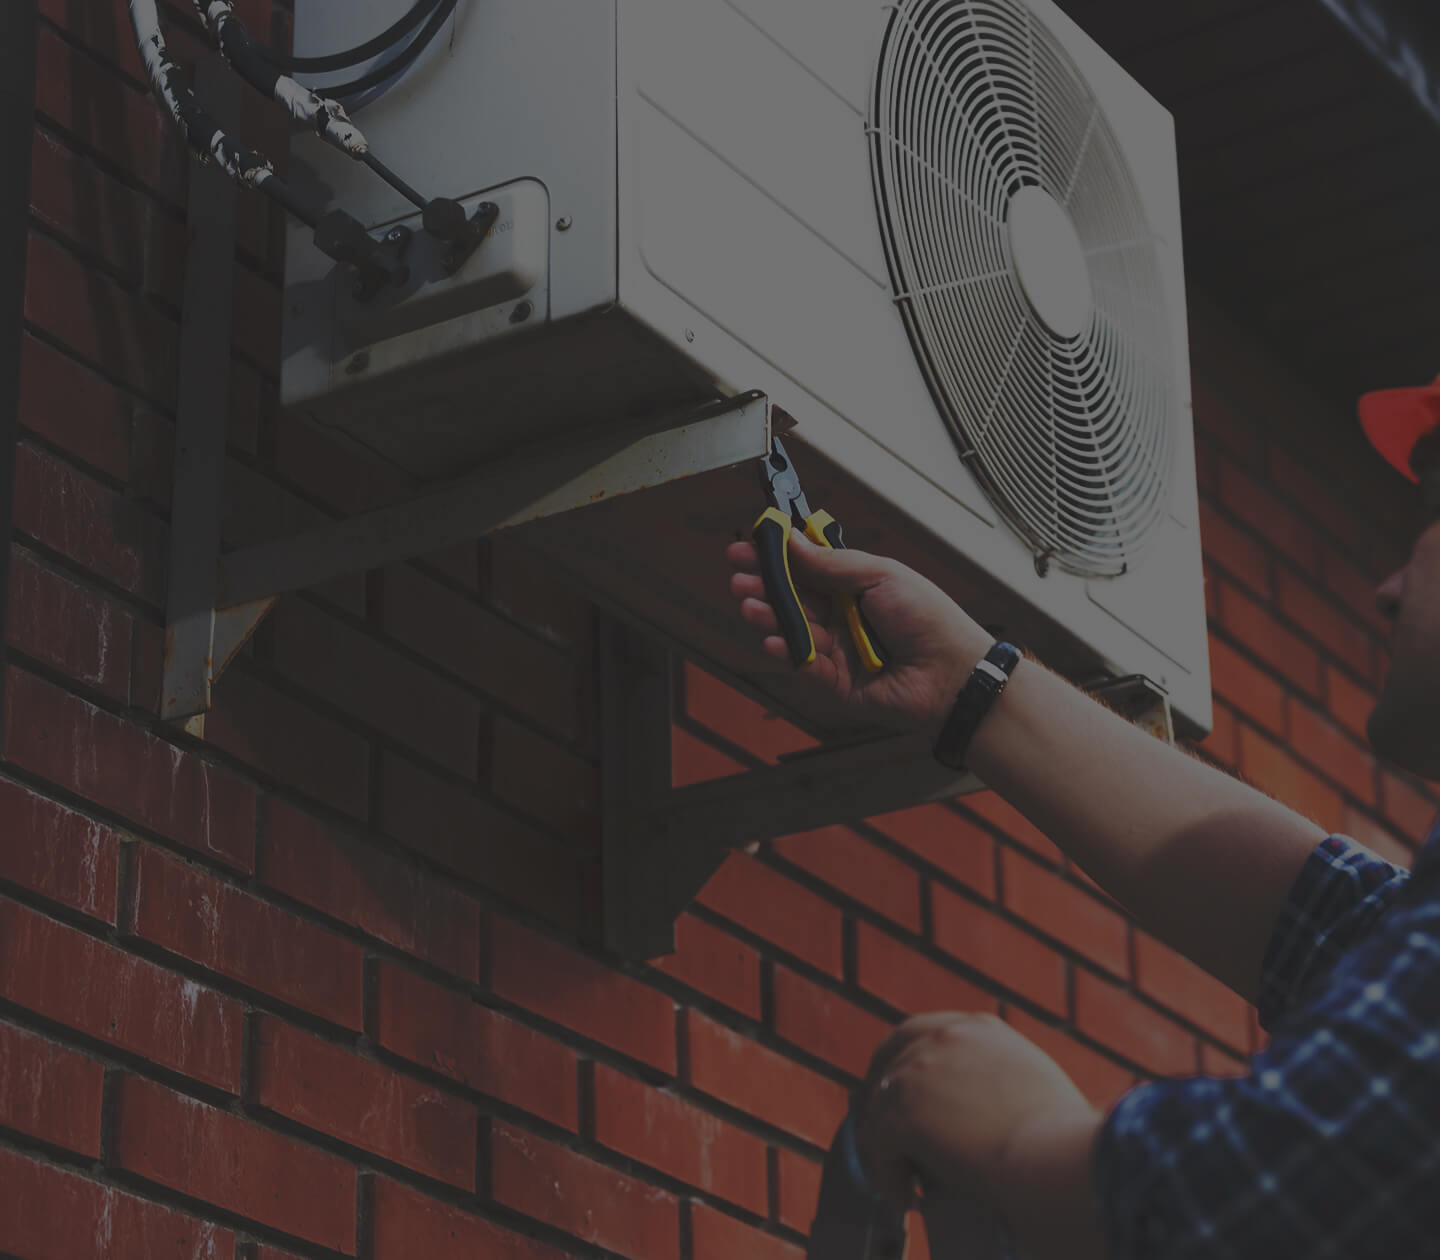 Hiring an HVAC Technician? Here’s What You Should Be Looking For.